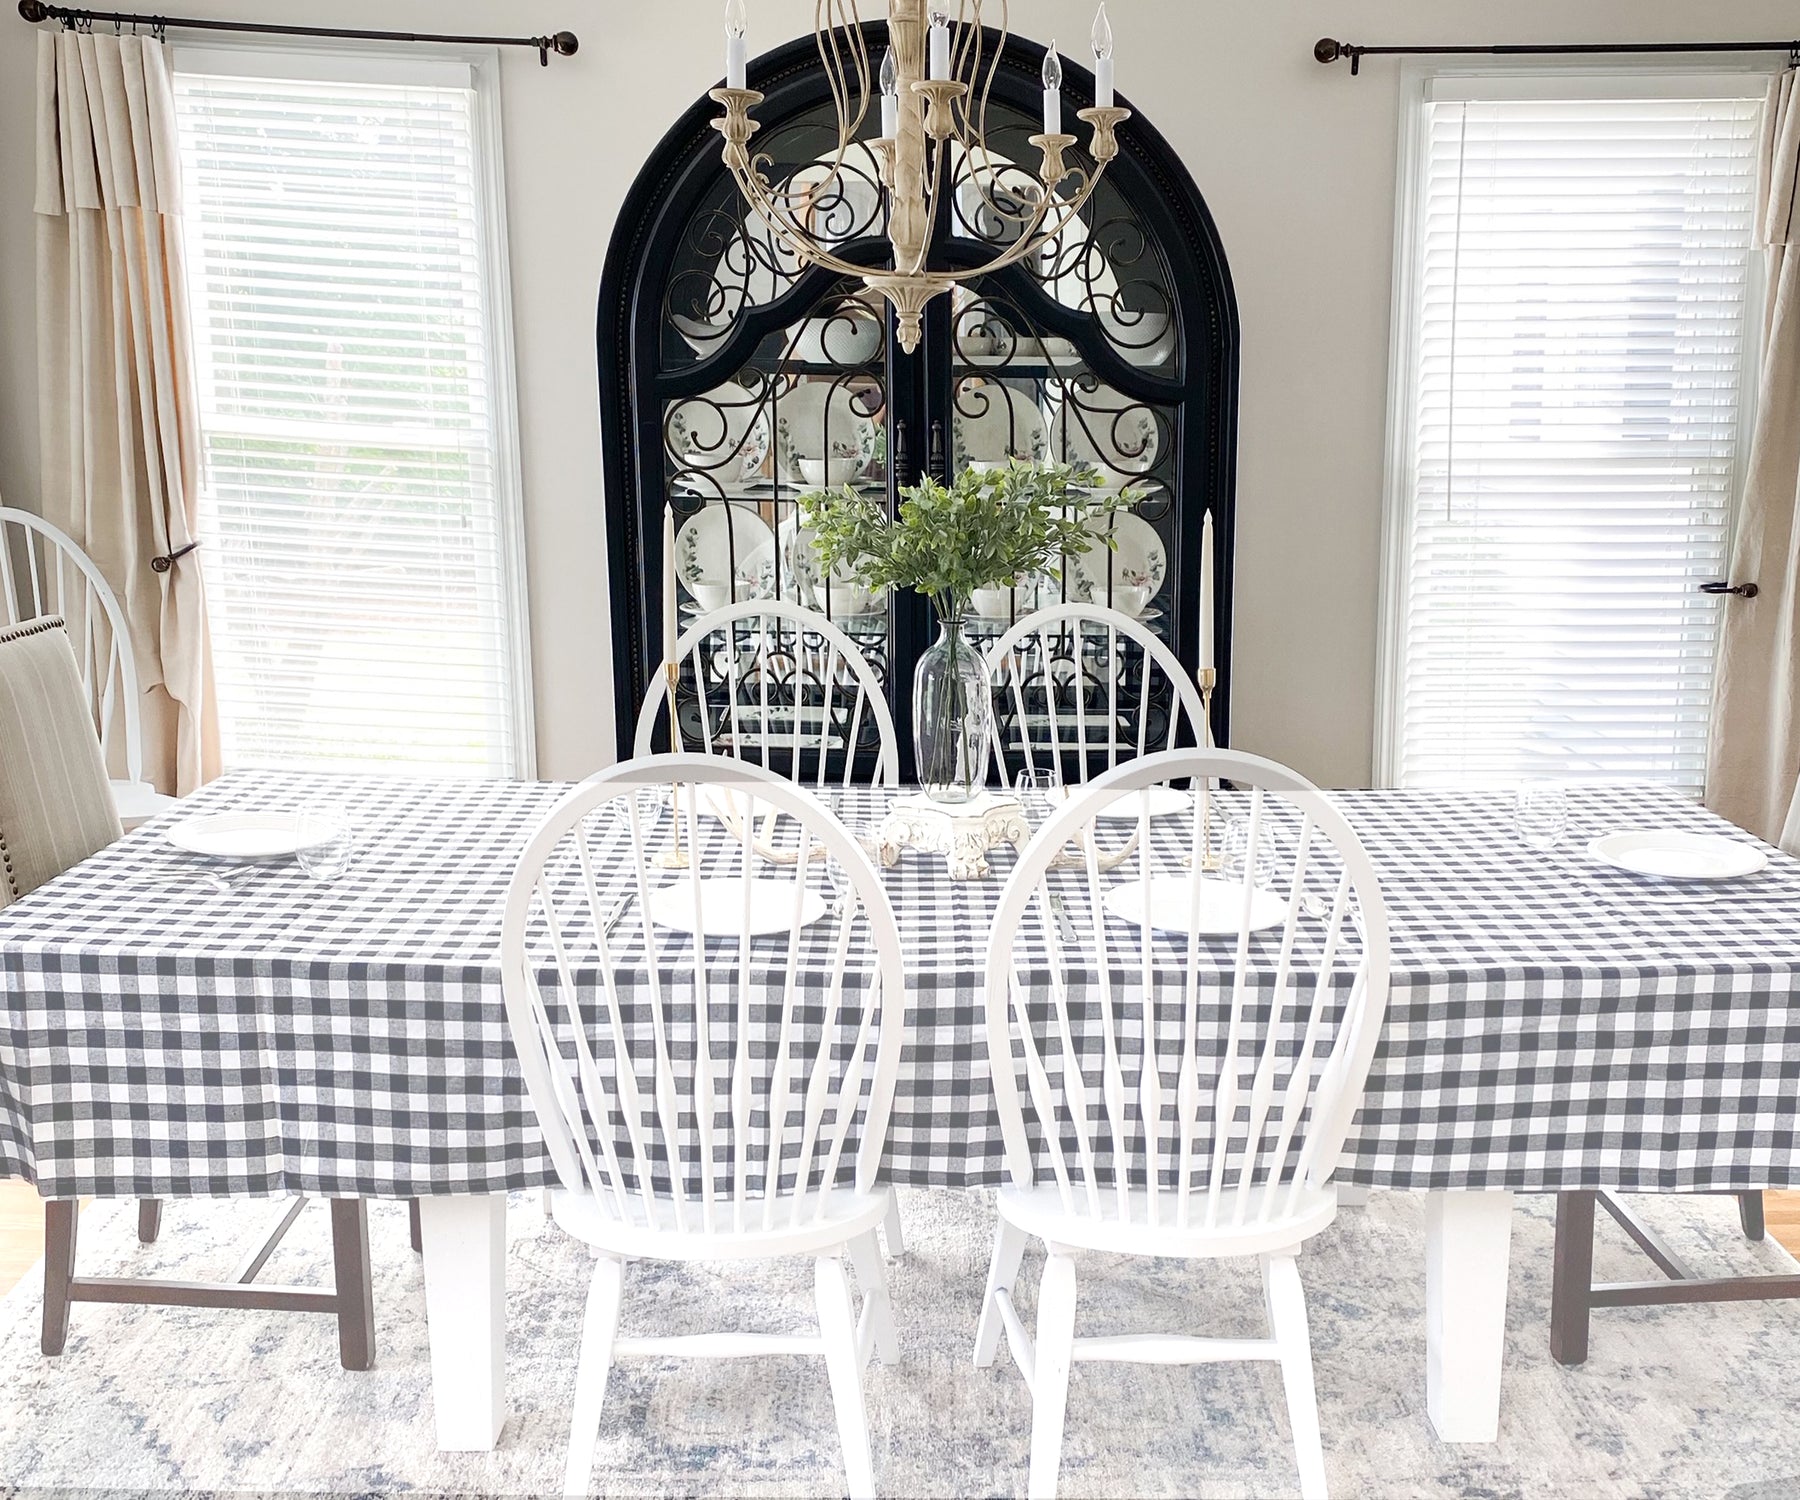 Stylish gingham checkered plaid tablecloth, a classic choice for any table.